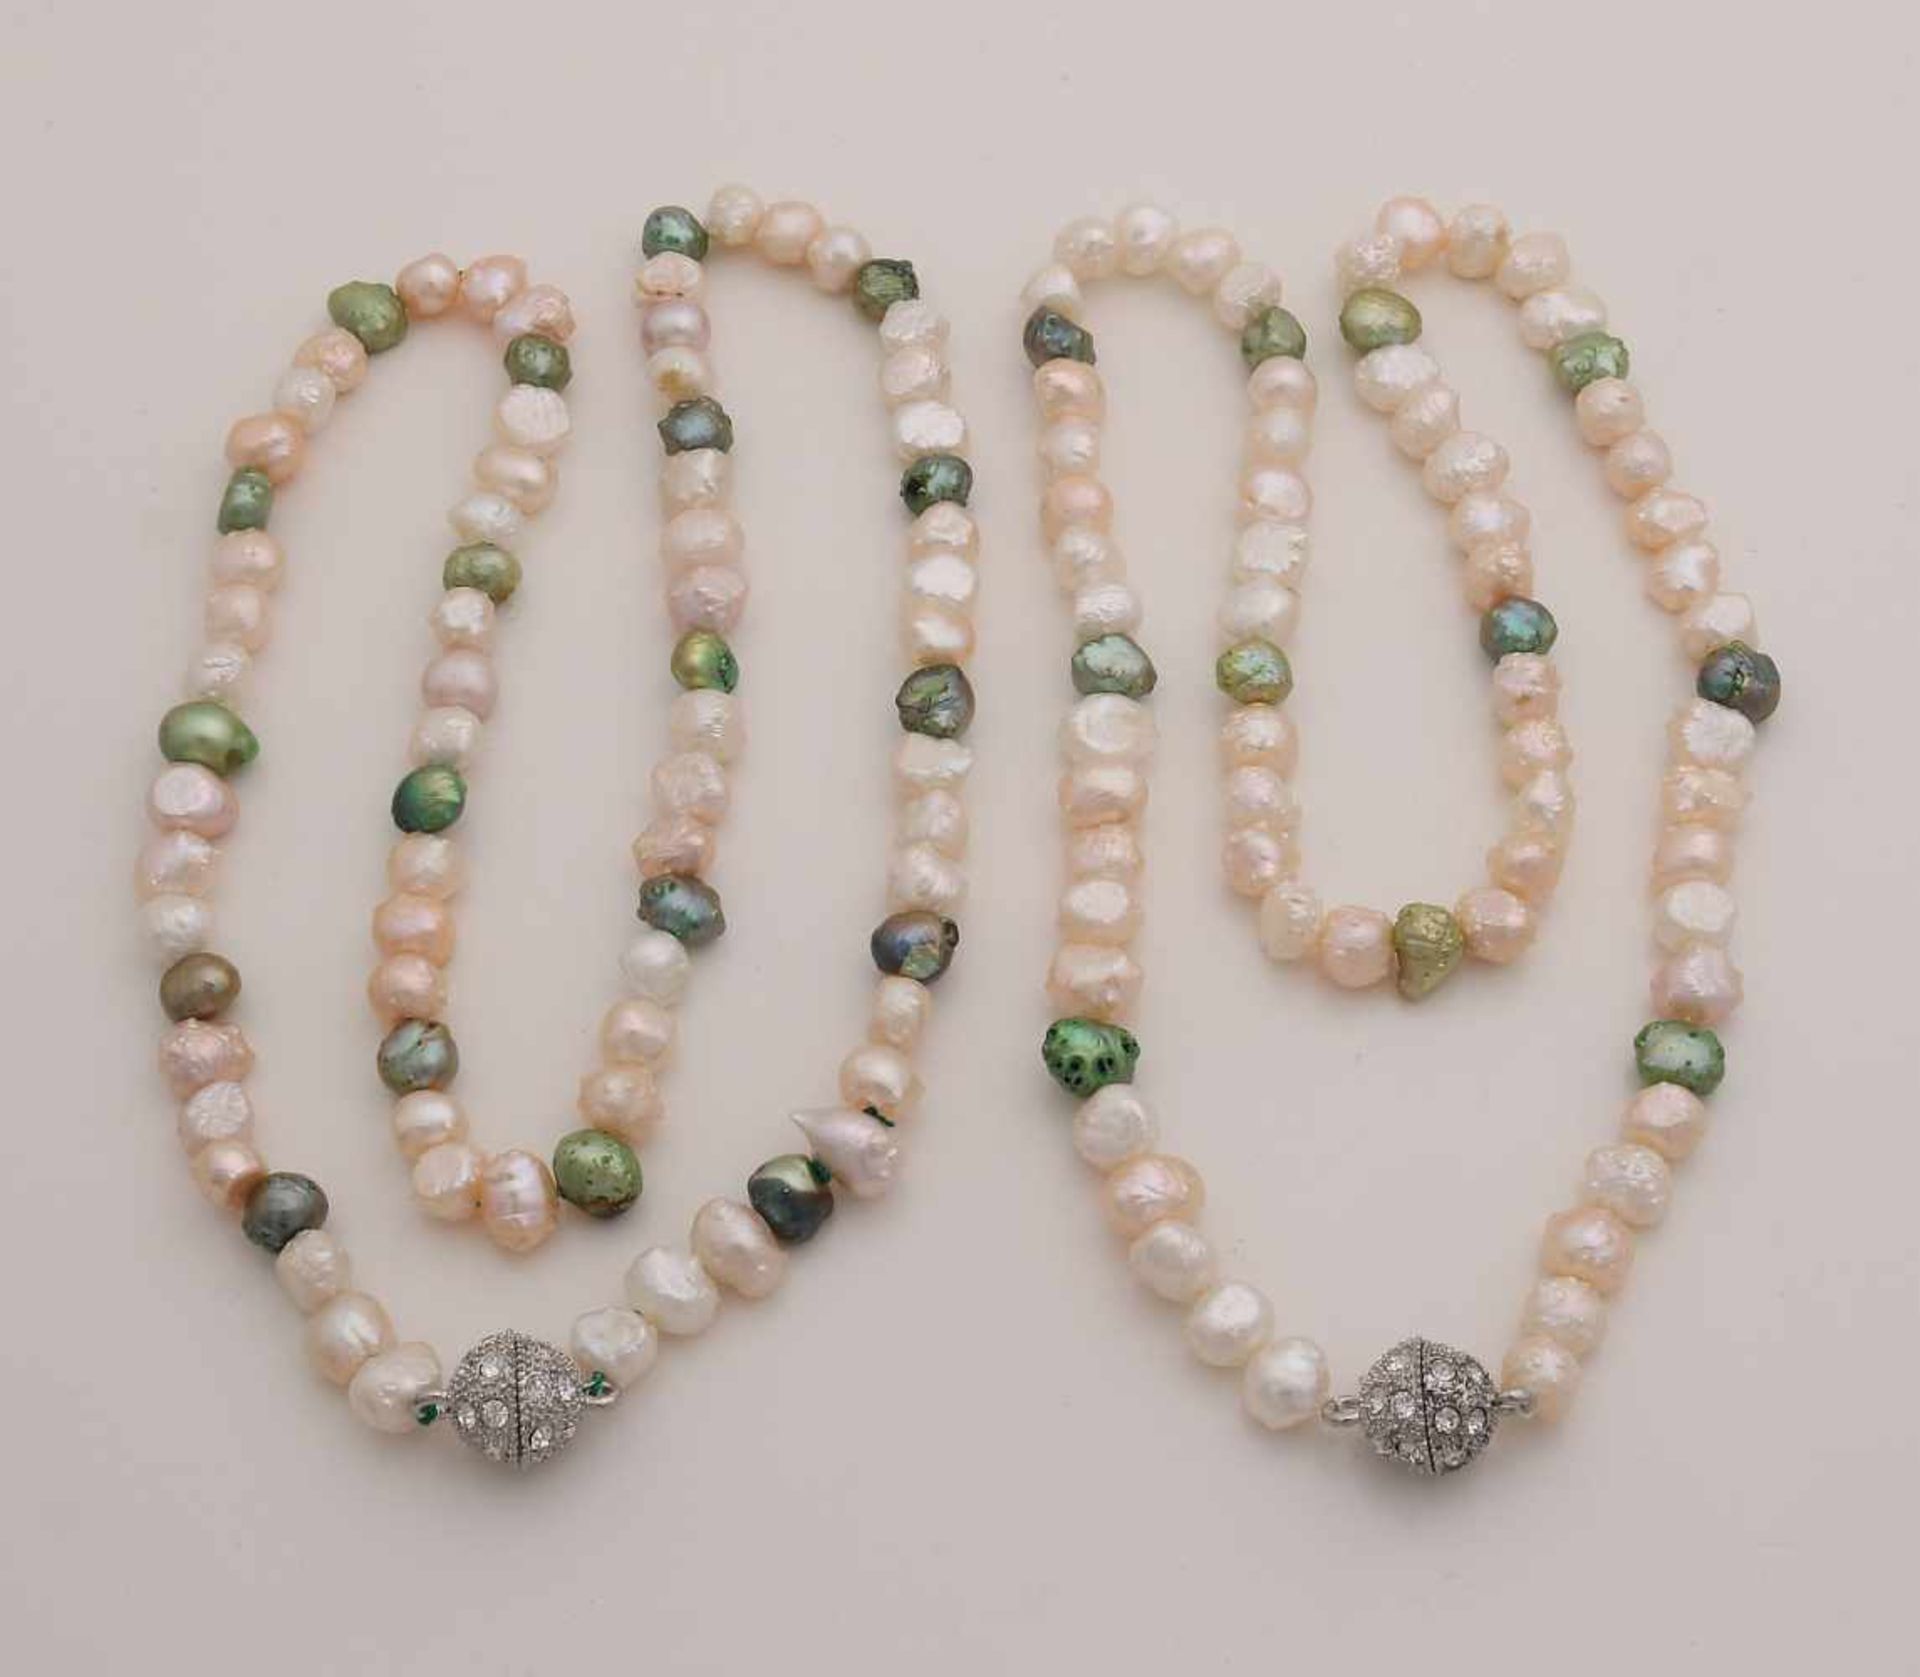 Two necklaces of whimsical freshwater pearls, mixed with green pearls and fitted with a white